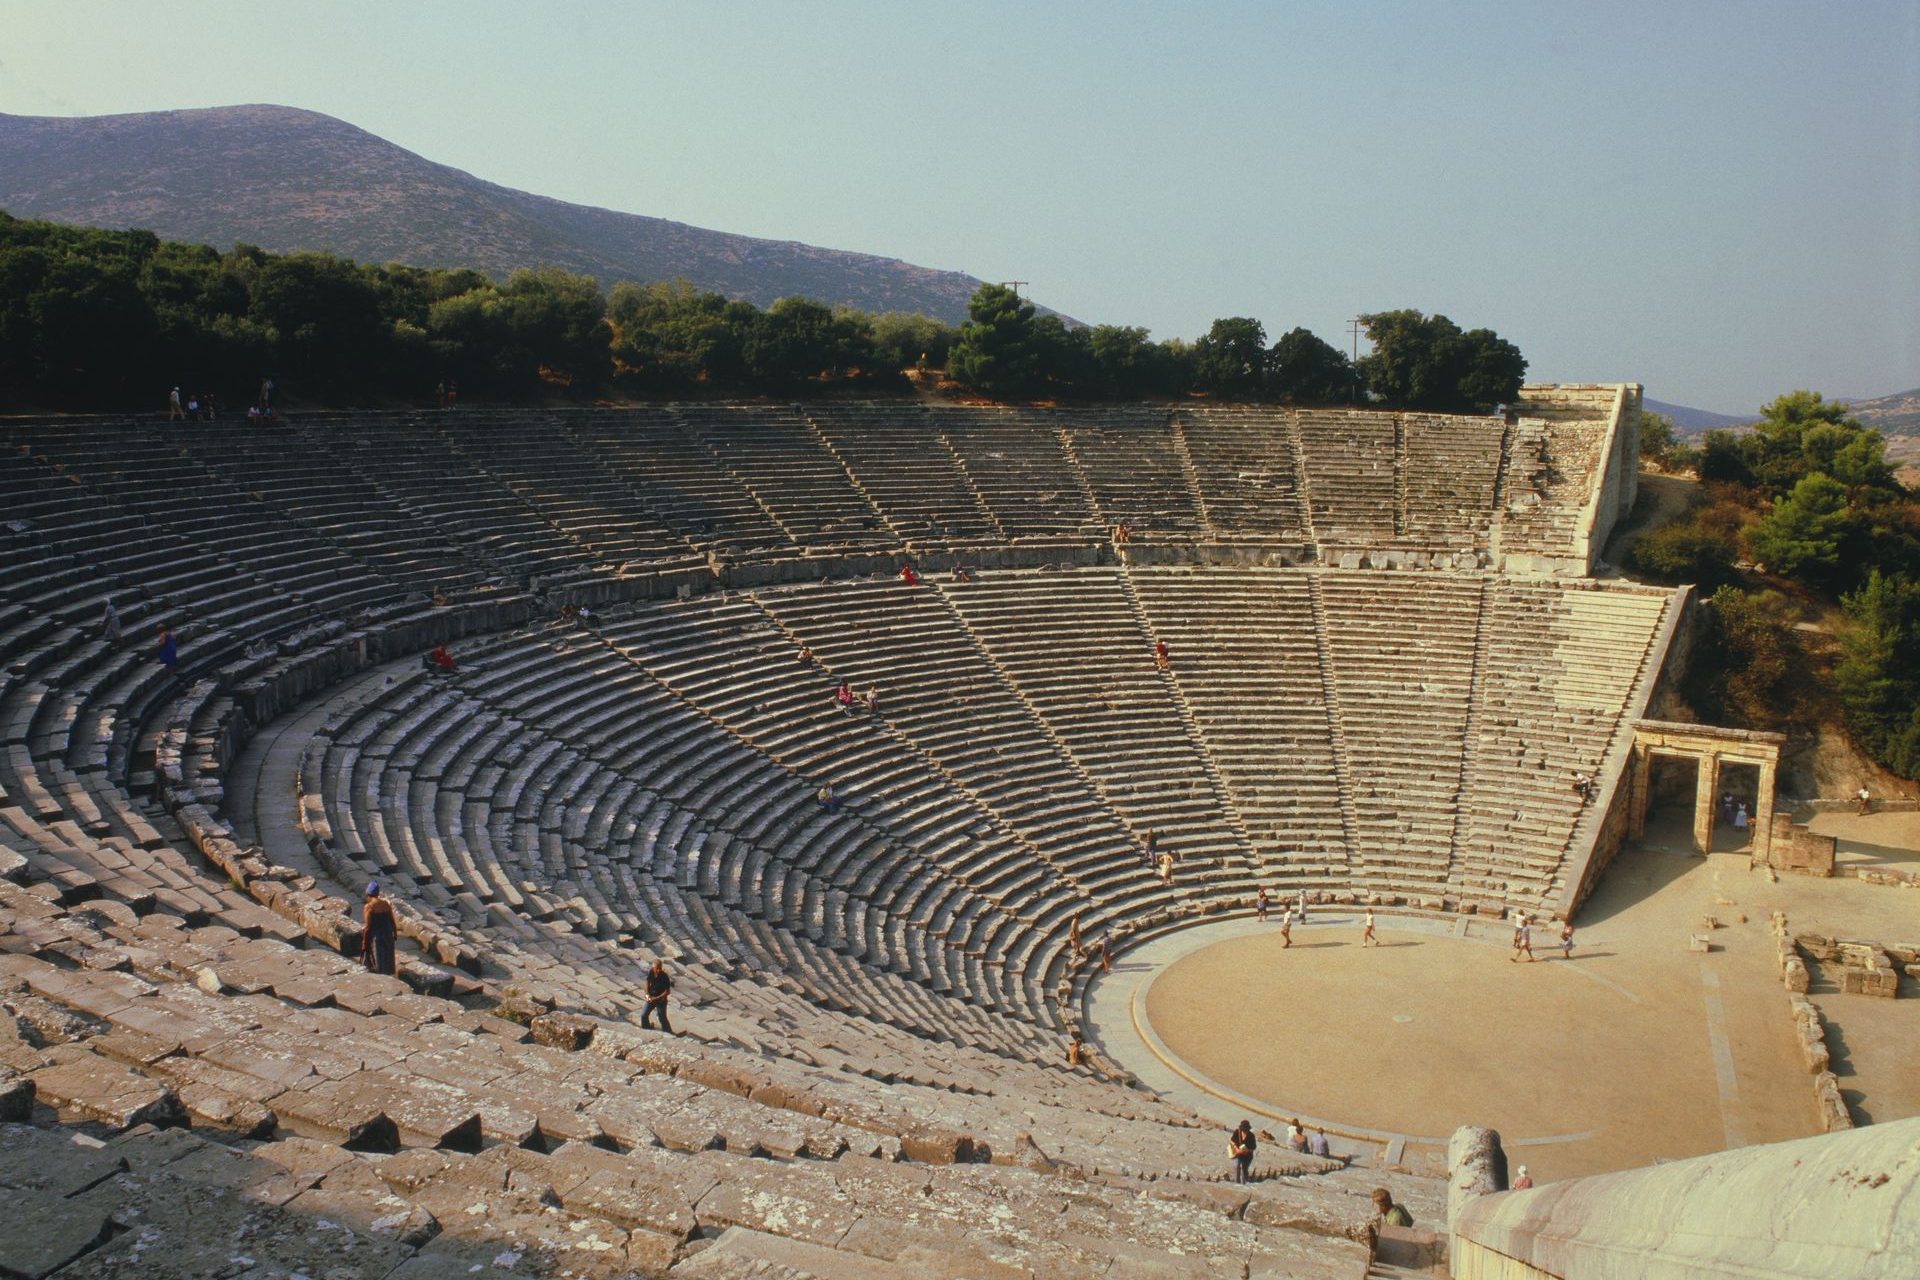 <p>The theater of Epidaurus is also one of the must-visit places in Greece. Built in the 4th century BC and remarkably preserved, the theater is still used for performances due to its beauty and excellent acoustics. The complex also includes a temple and a stadium.</p>